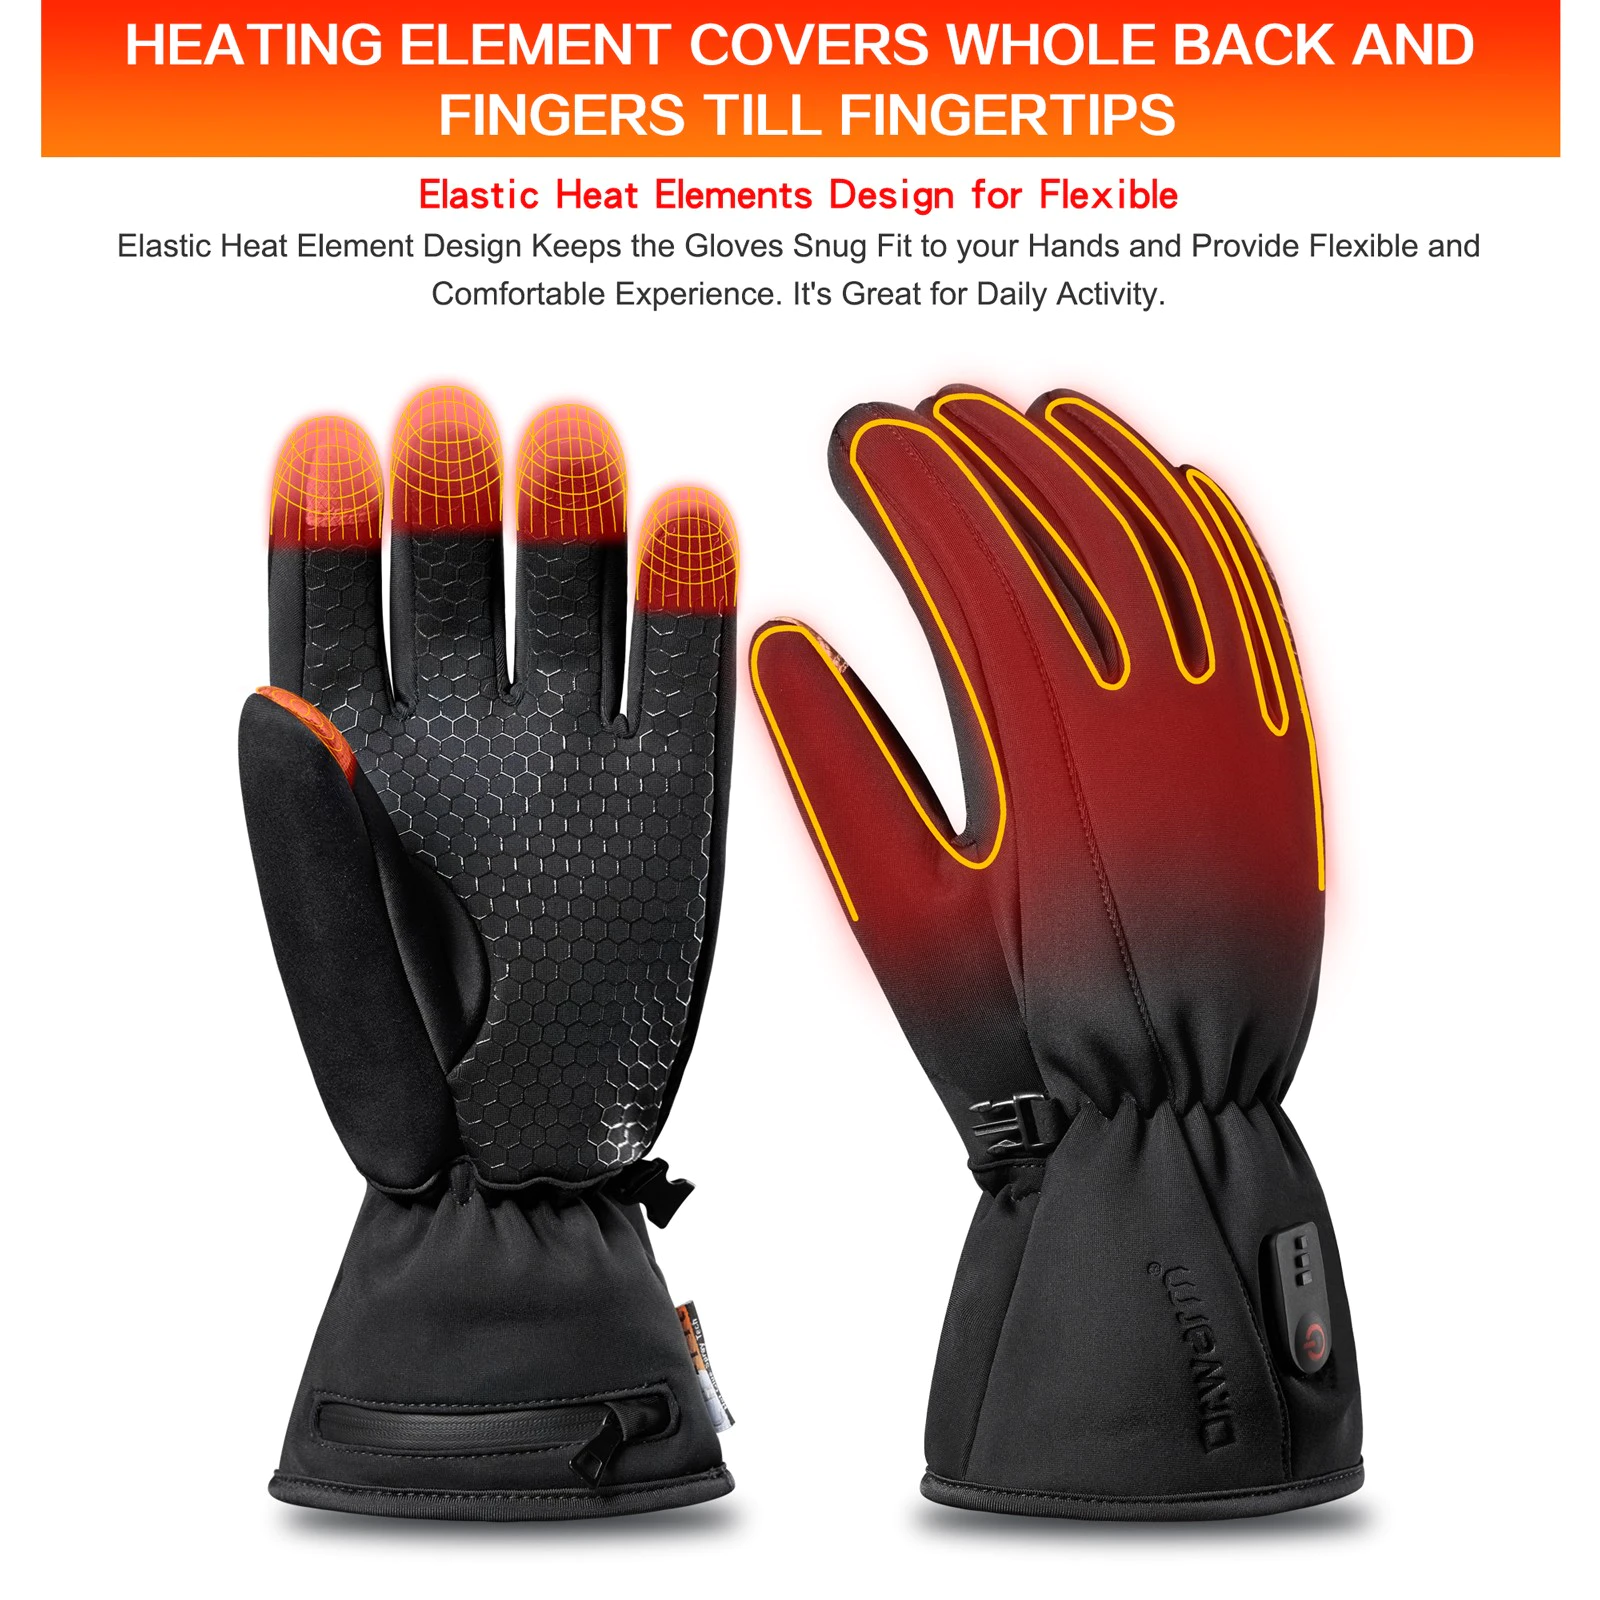 Dr. Warm heating electric hand warmer gloves for home